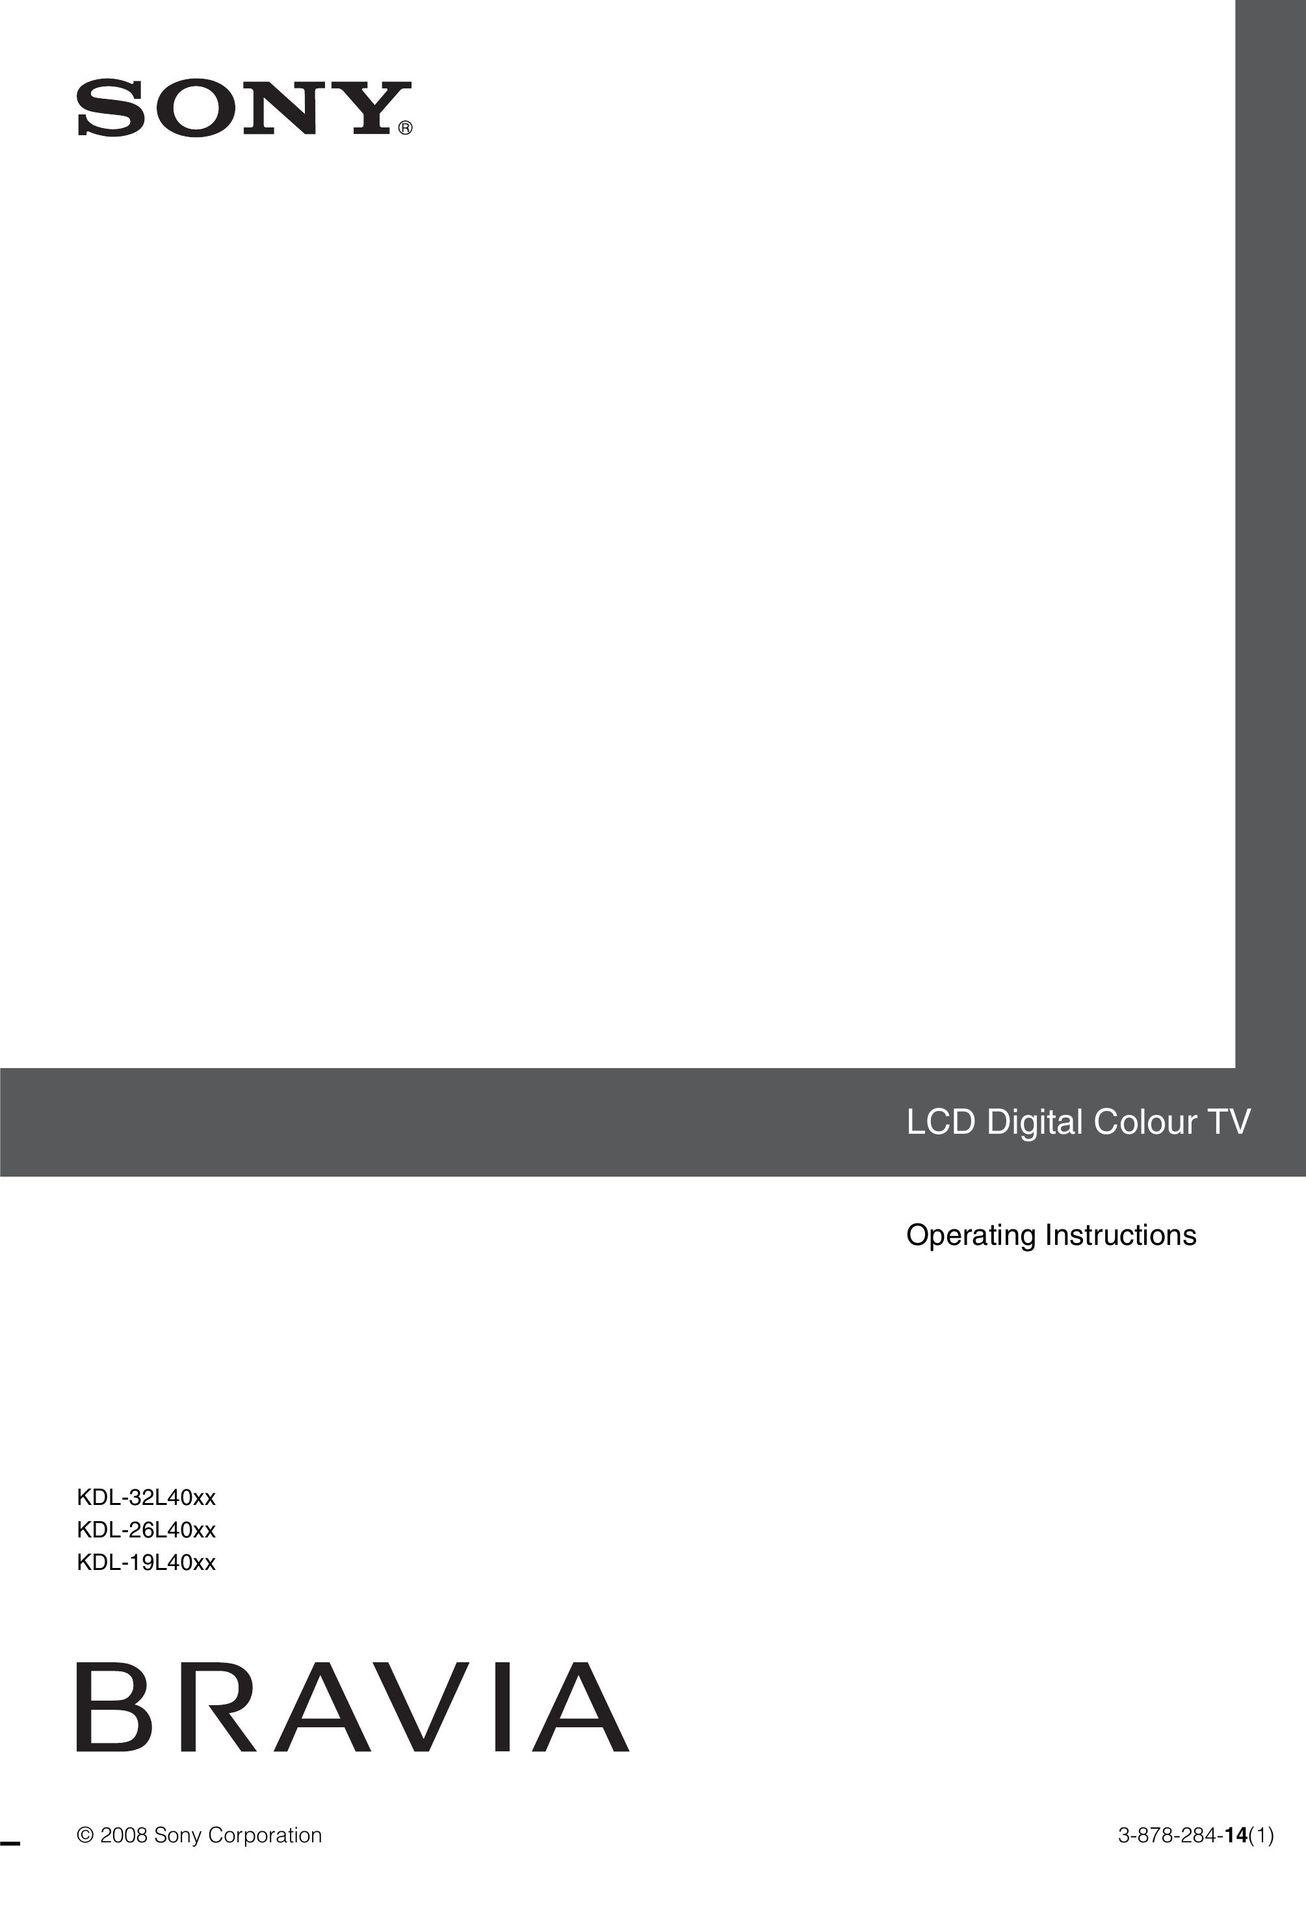 Sony 3-878-284-14(1) Flat Panel Television User Manual